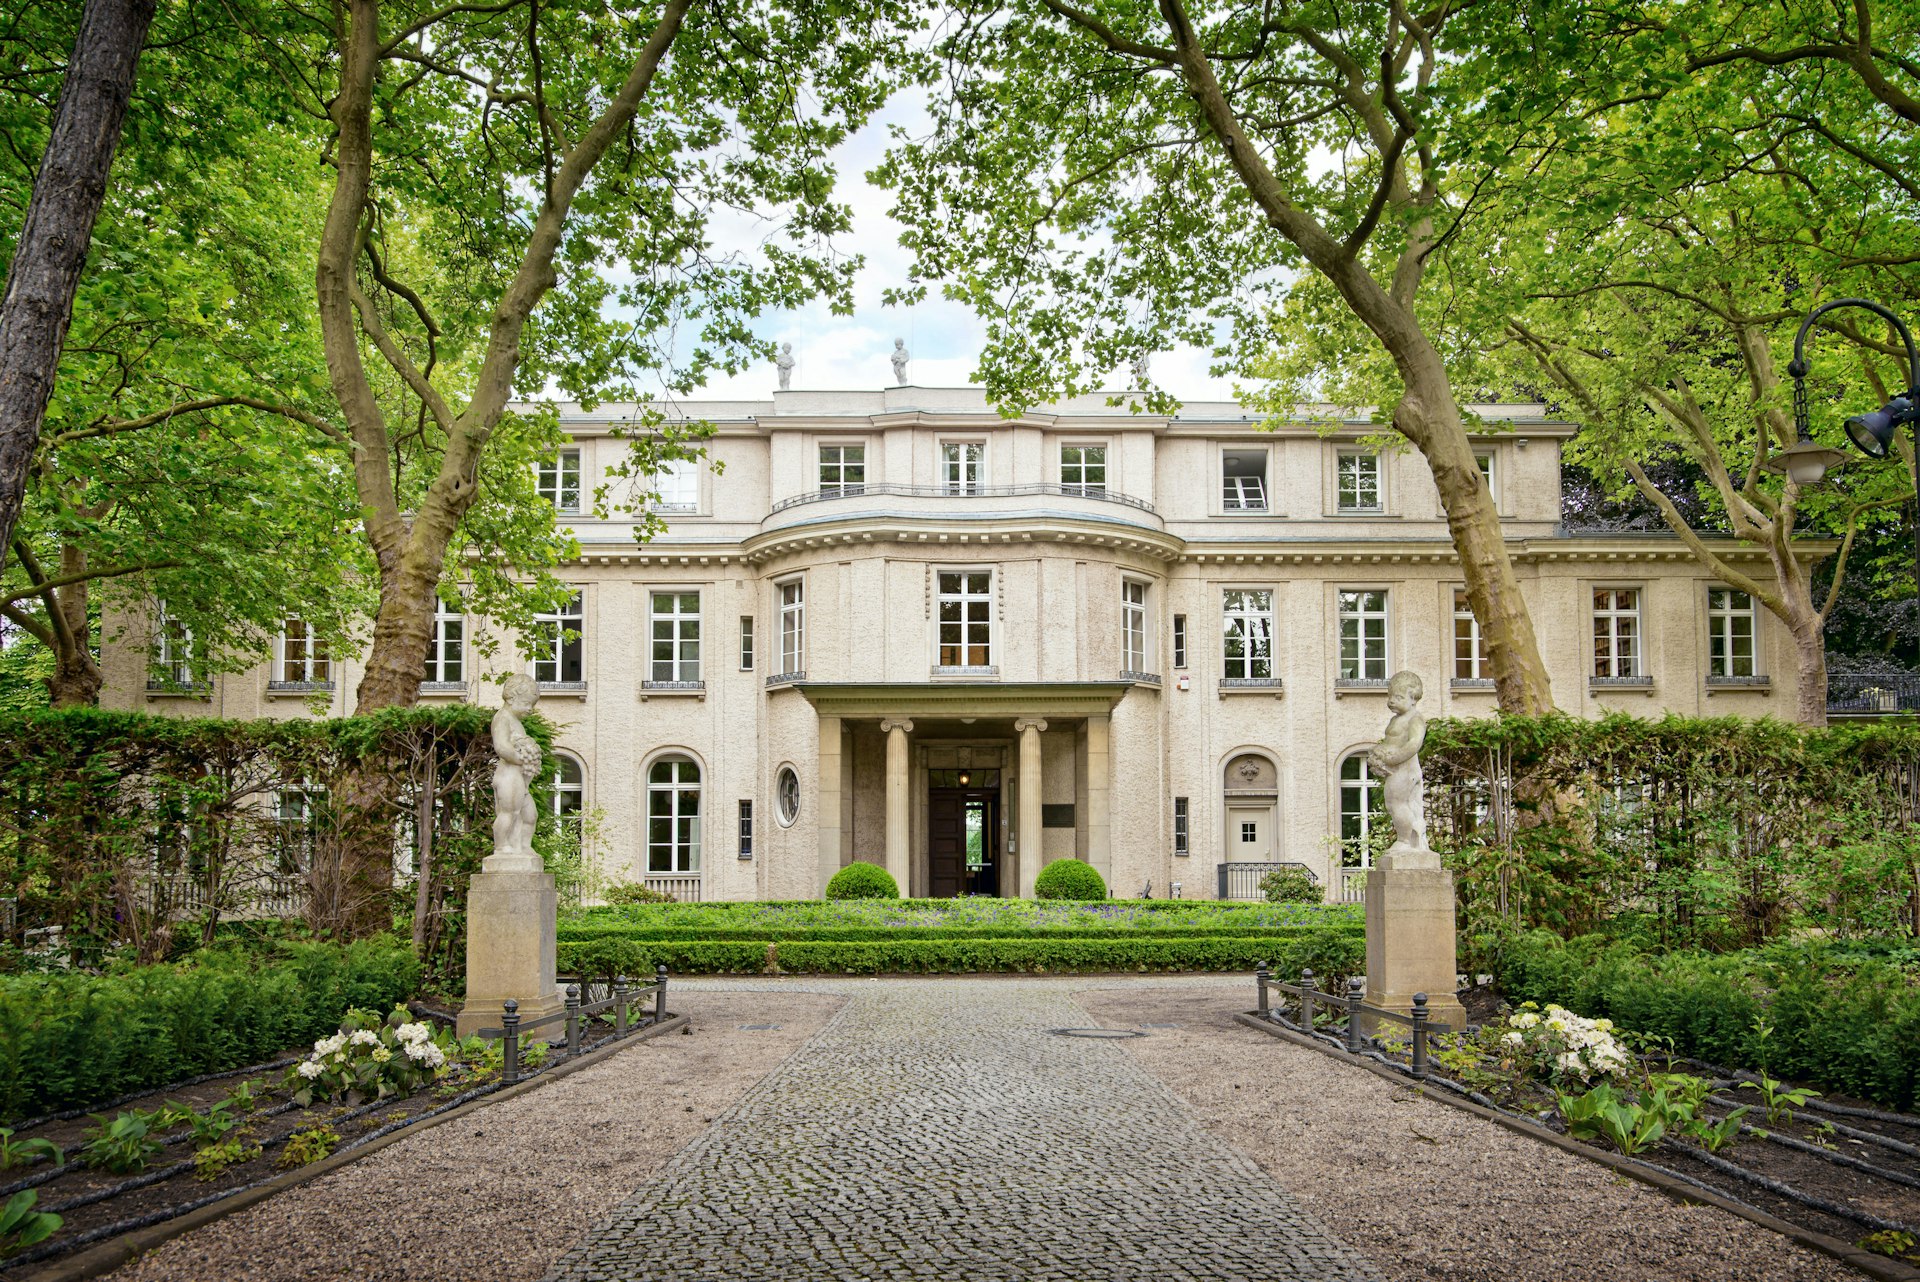 House of the Wannsee conference in Berlin, Germany 